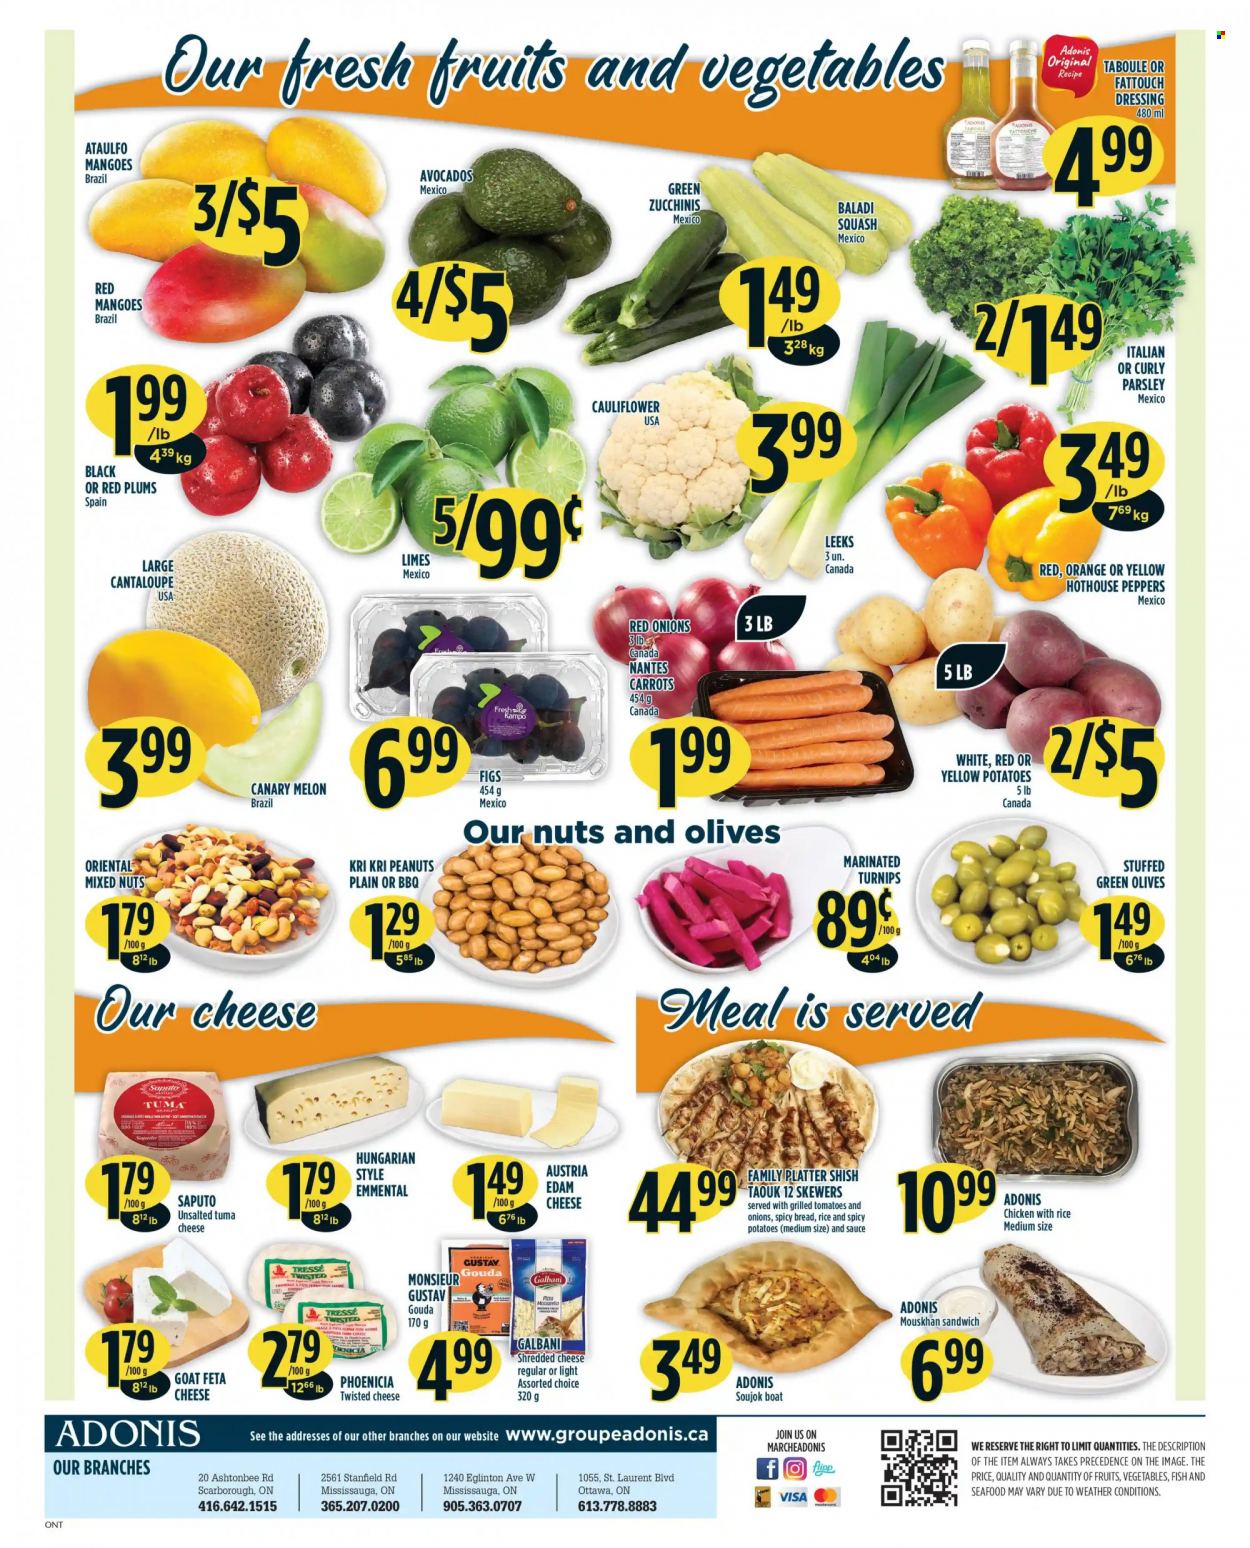 thumbnail - Adonis Flyer - November 04, 2021 - November 10, 2021 - Sales products - cantaloupe, red onions, potatoes, parsley, avocado, figs, limes, mango, plums, red plums, melons, seafood, pizza, sandwich, sauce, edam cheese, gouda, shredded cheese, feta, Galbani, dressing, peanuts, mixed nuts, turnips, olives, oranges. Page 2.